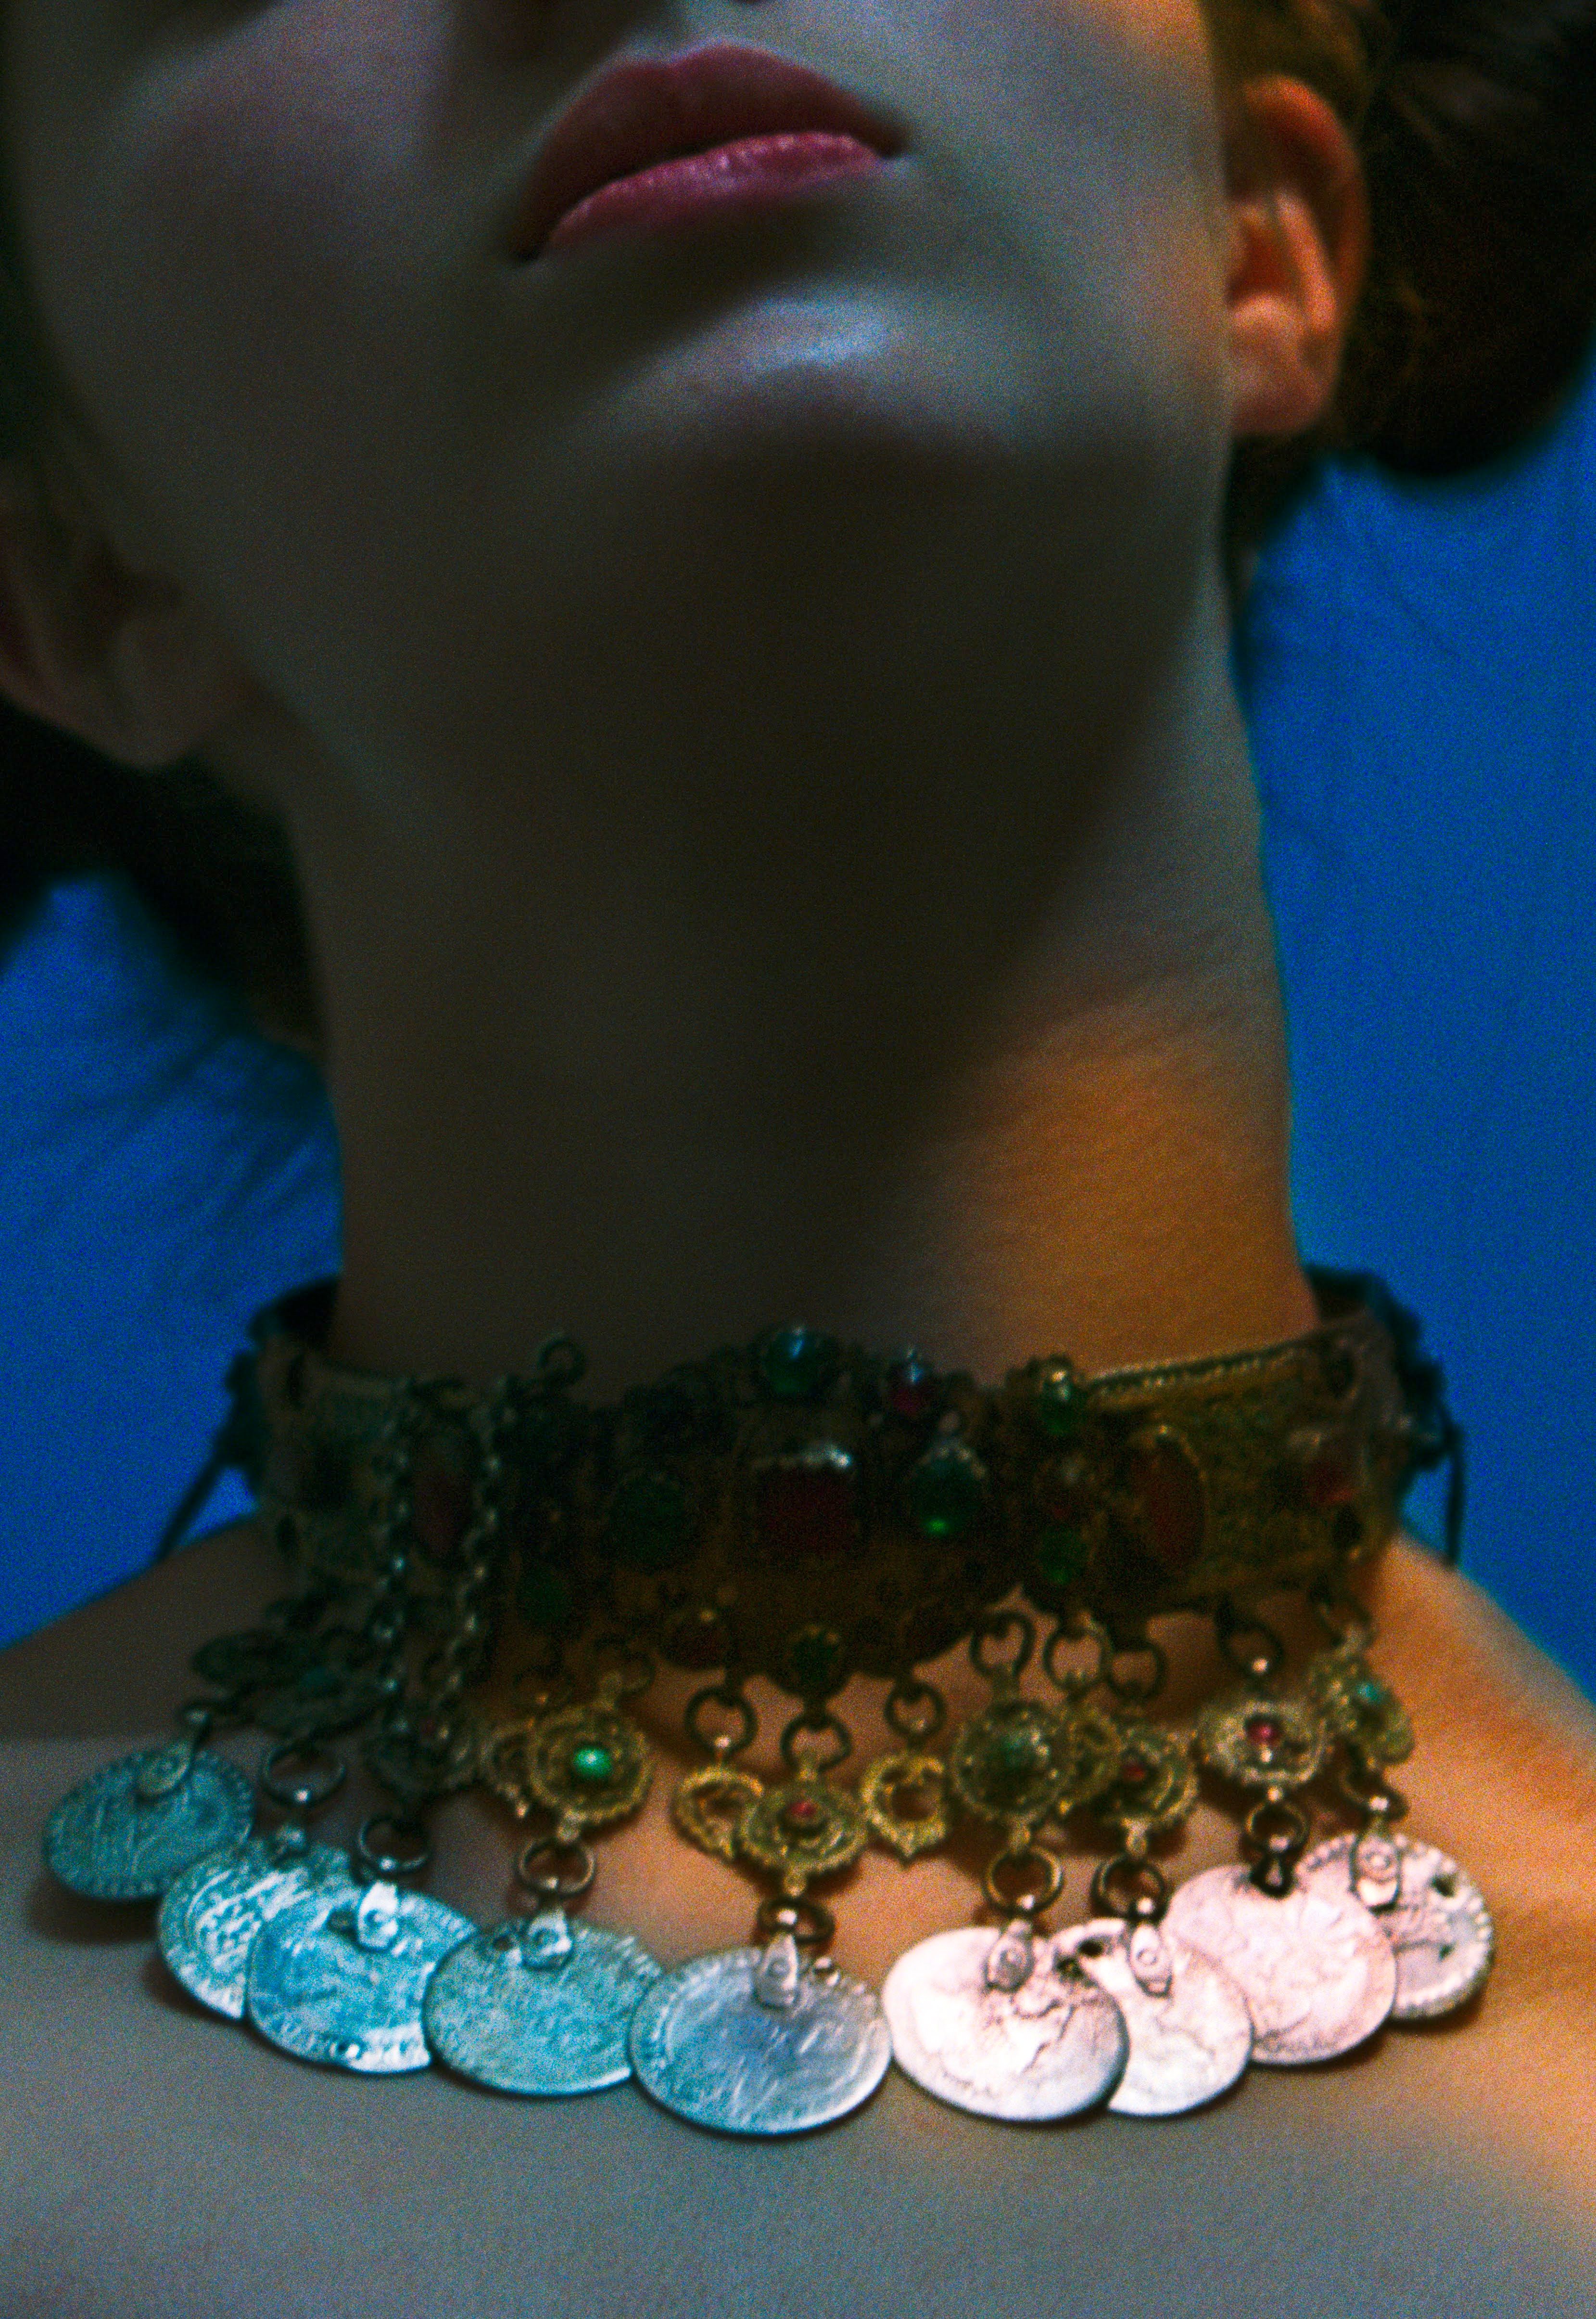 Close up of woman's neck wearing an Ancient Greek necklace with gemstones and coins